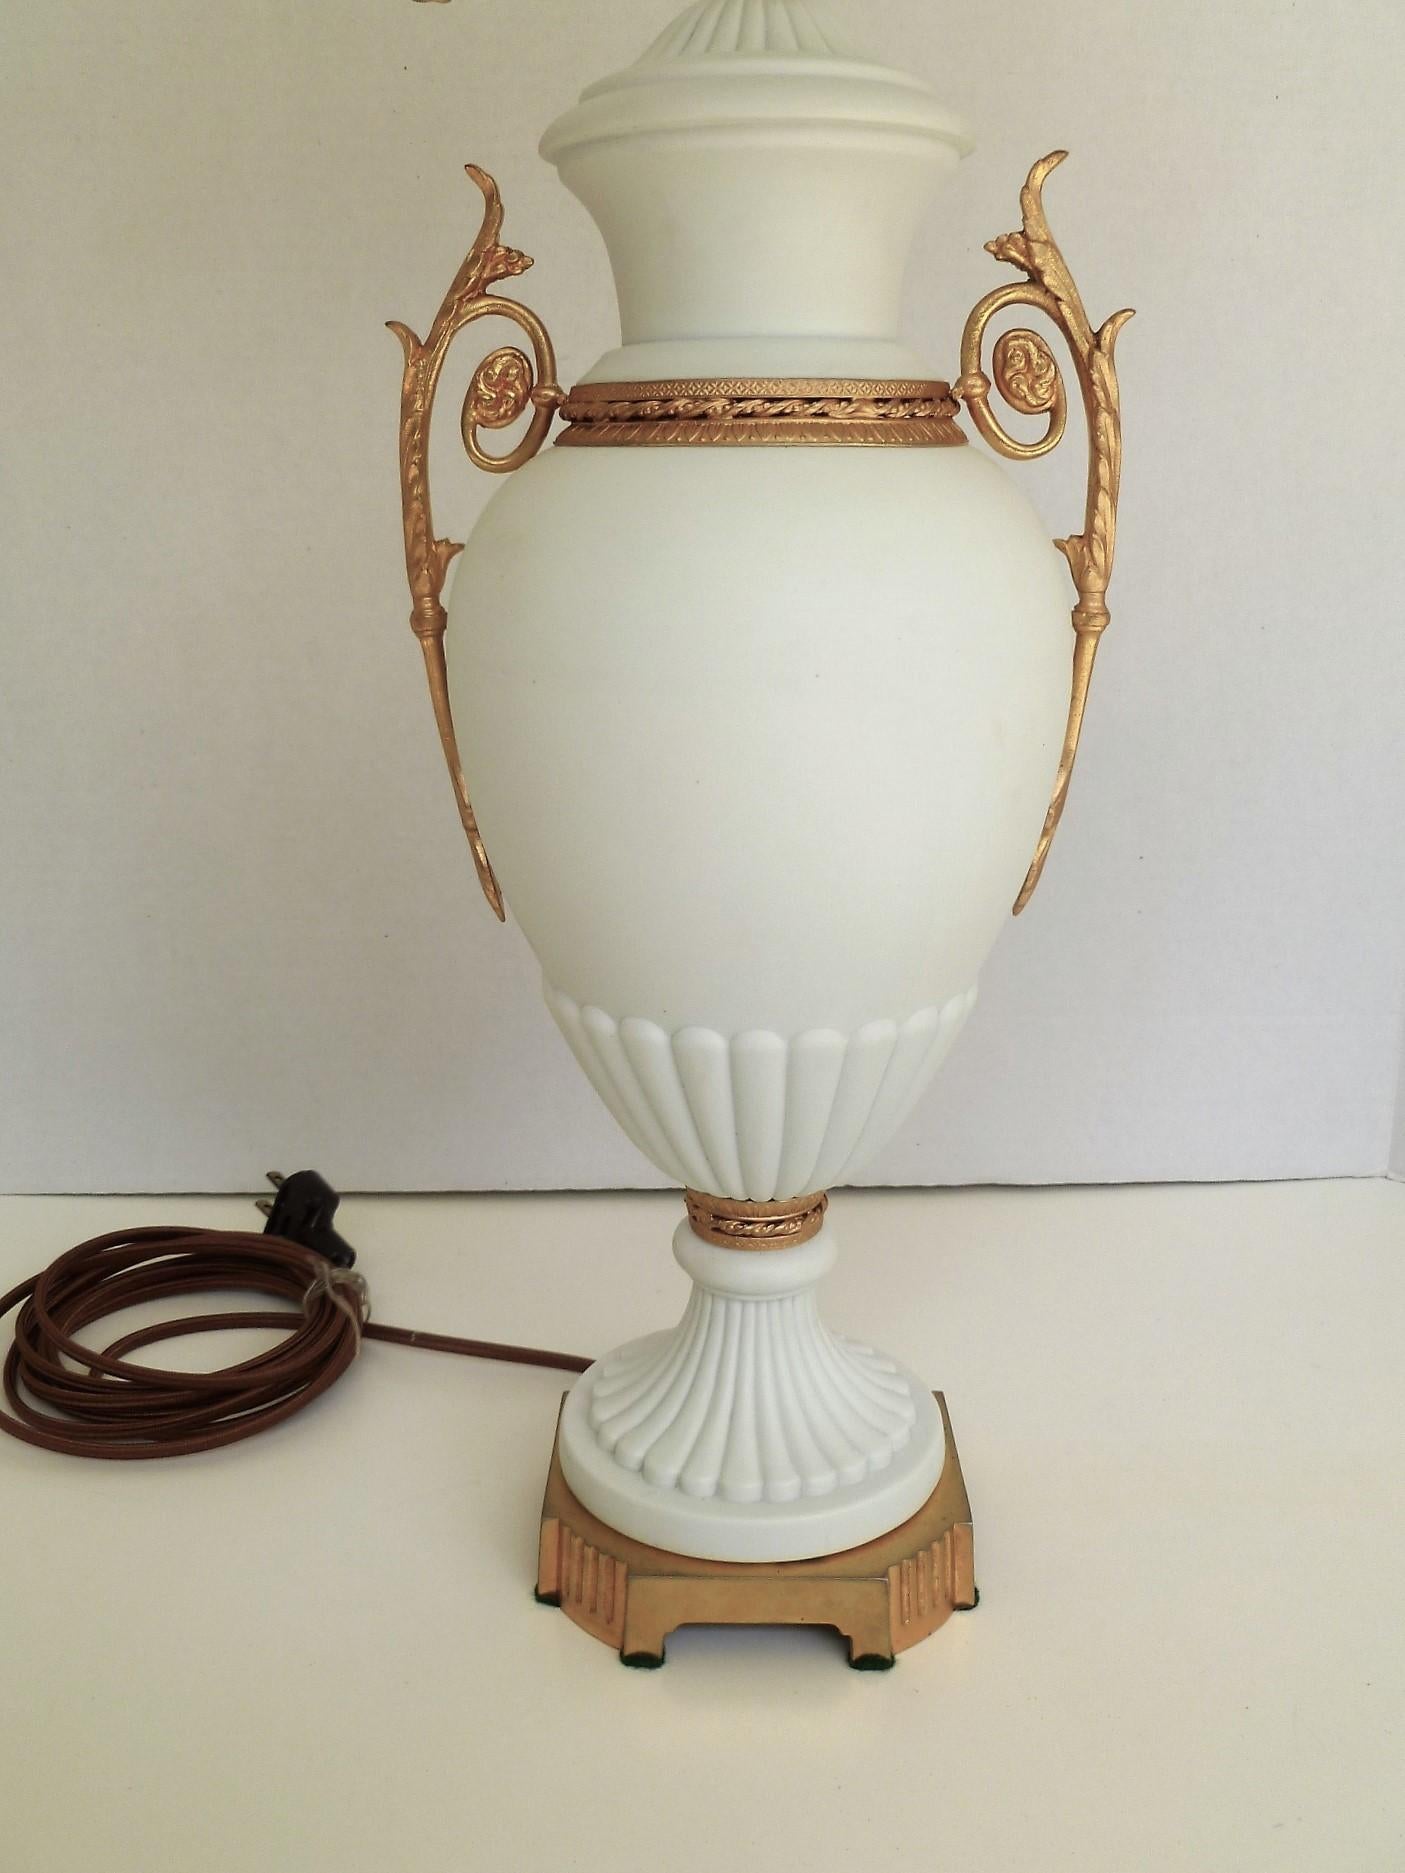 Mid-20th Century French Bisque Porcelain and Gilt Bronze Classical Urn Form Table Lamp